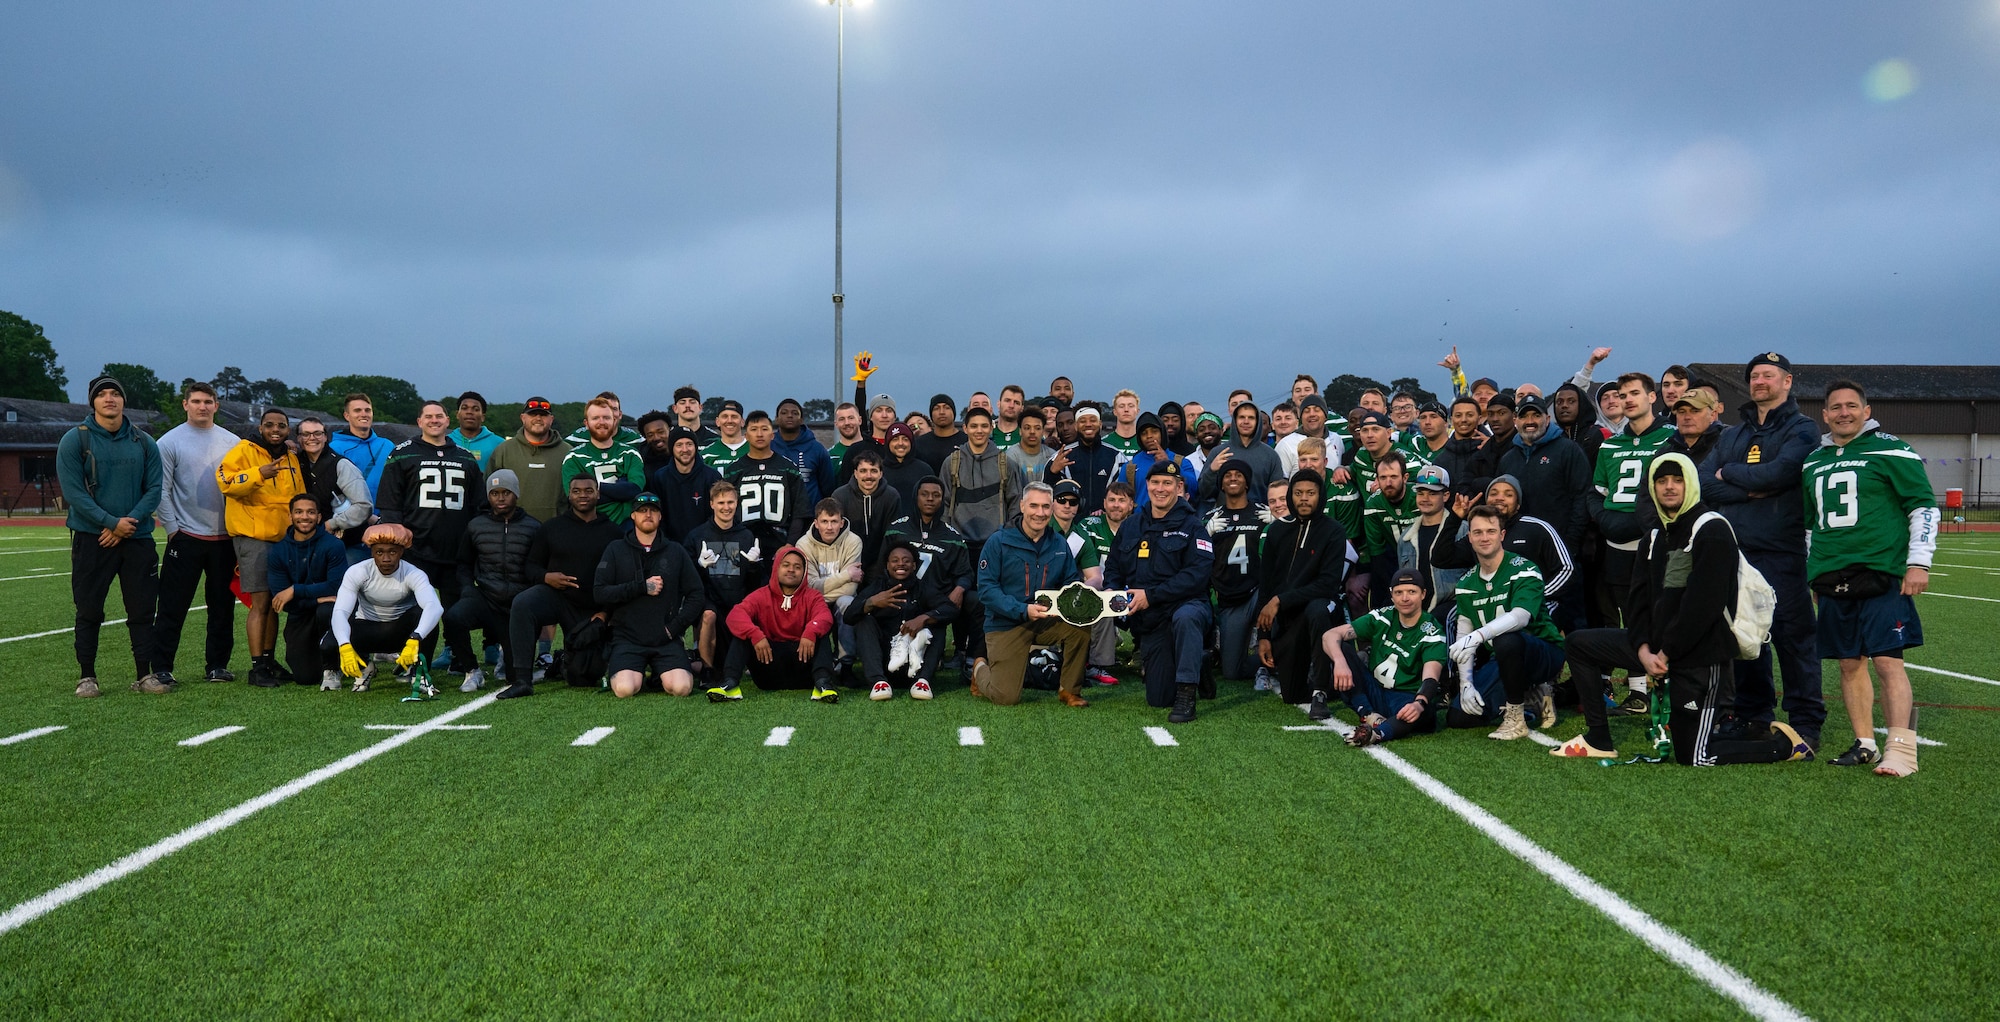 U.K. Armed Forces and U.S. Visiting Forces flag football teams pose for a photo after a friendly match at Royal Air Force Lakenheath, England, May 12, 2023.The flag football game, hosted by the New York Jets and the Armed Forces Flag Football Association, was intended to foster an environment where both teams could participate in a shared activity to promote teamwork, communication and mutual respect. (U.S. Air Force photo by Airman 1st Class Seleena Muhammad-Ali)